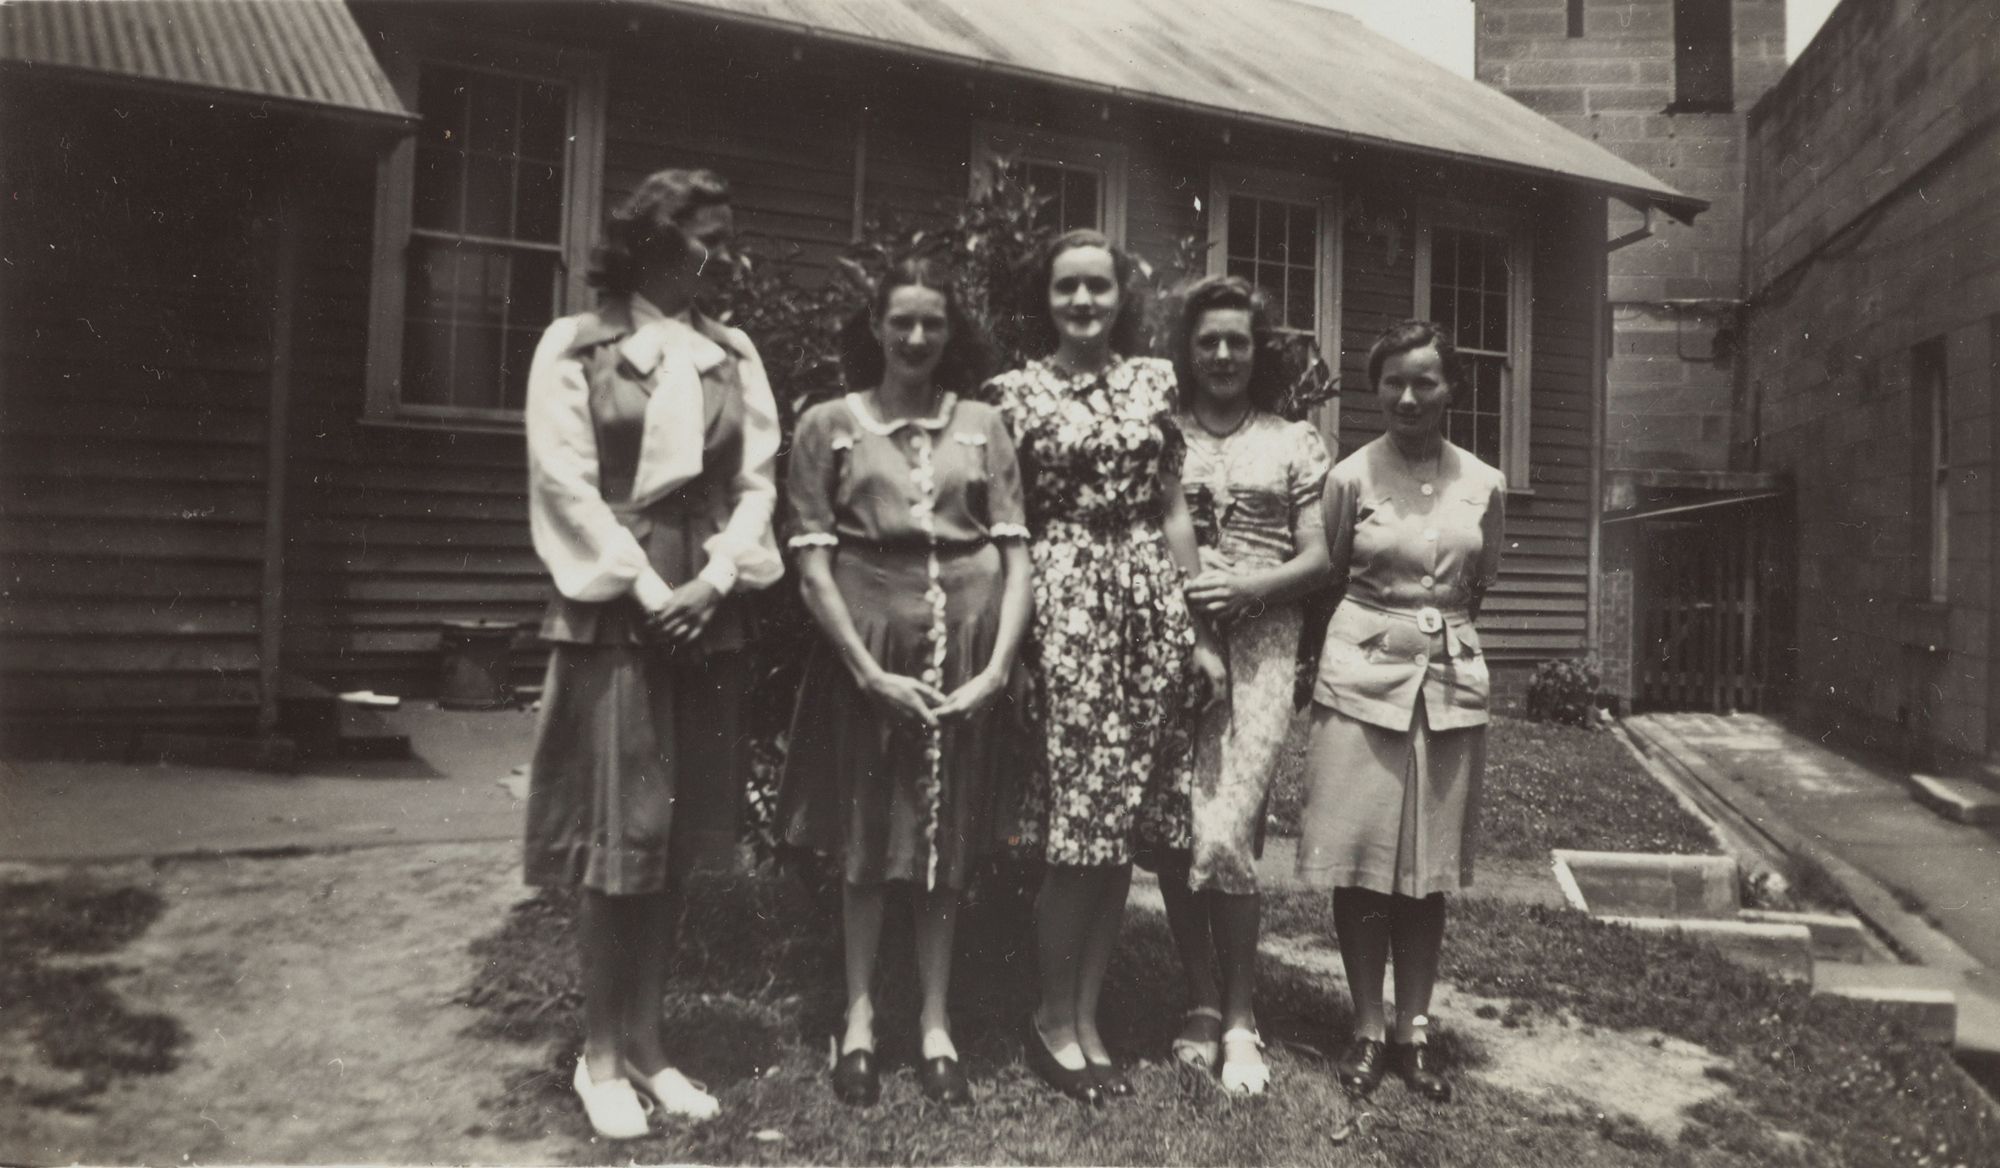 Five women pose together in front of a wooden building